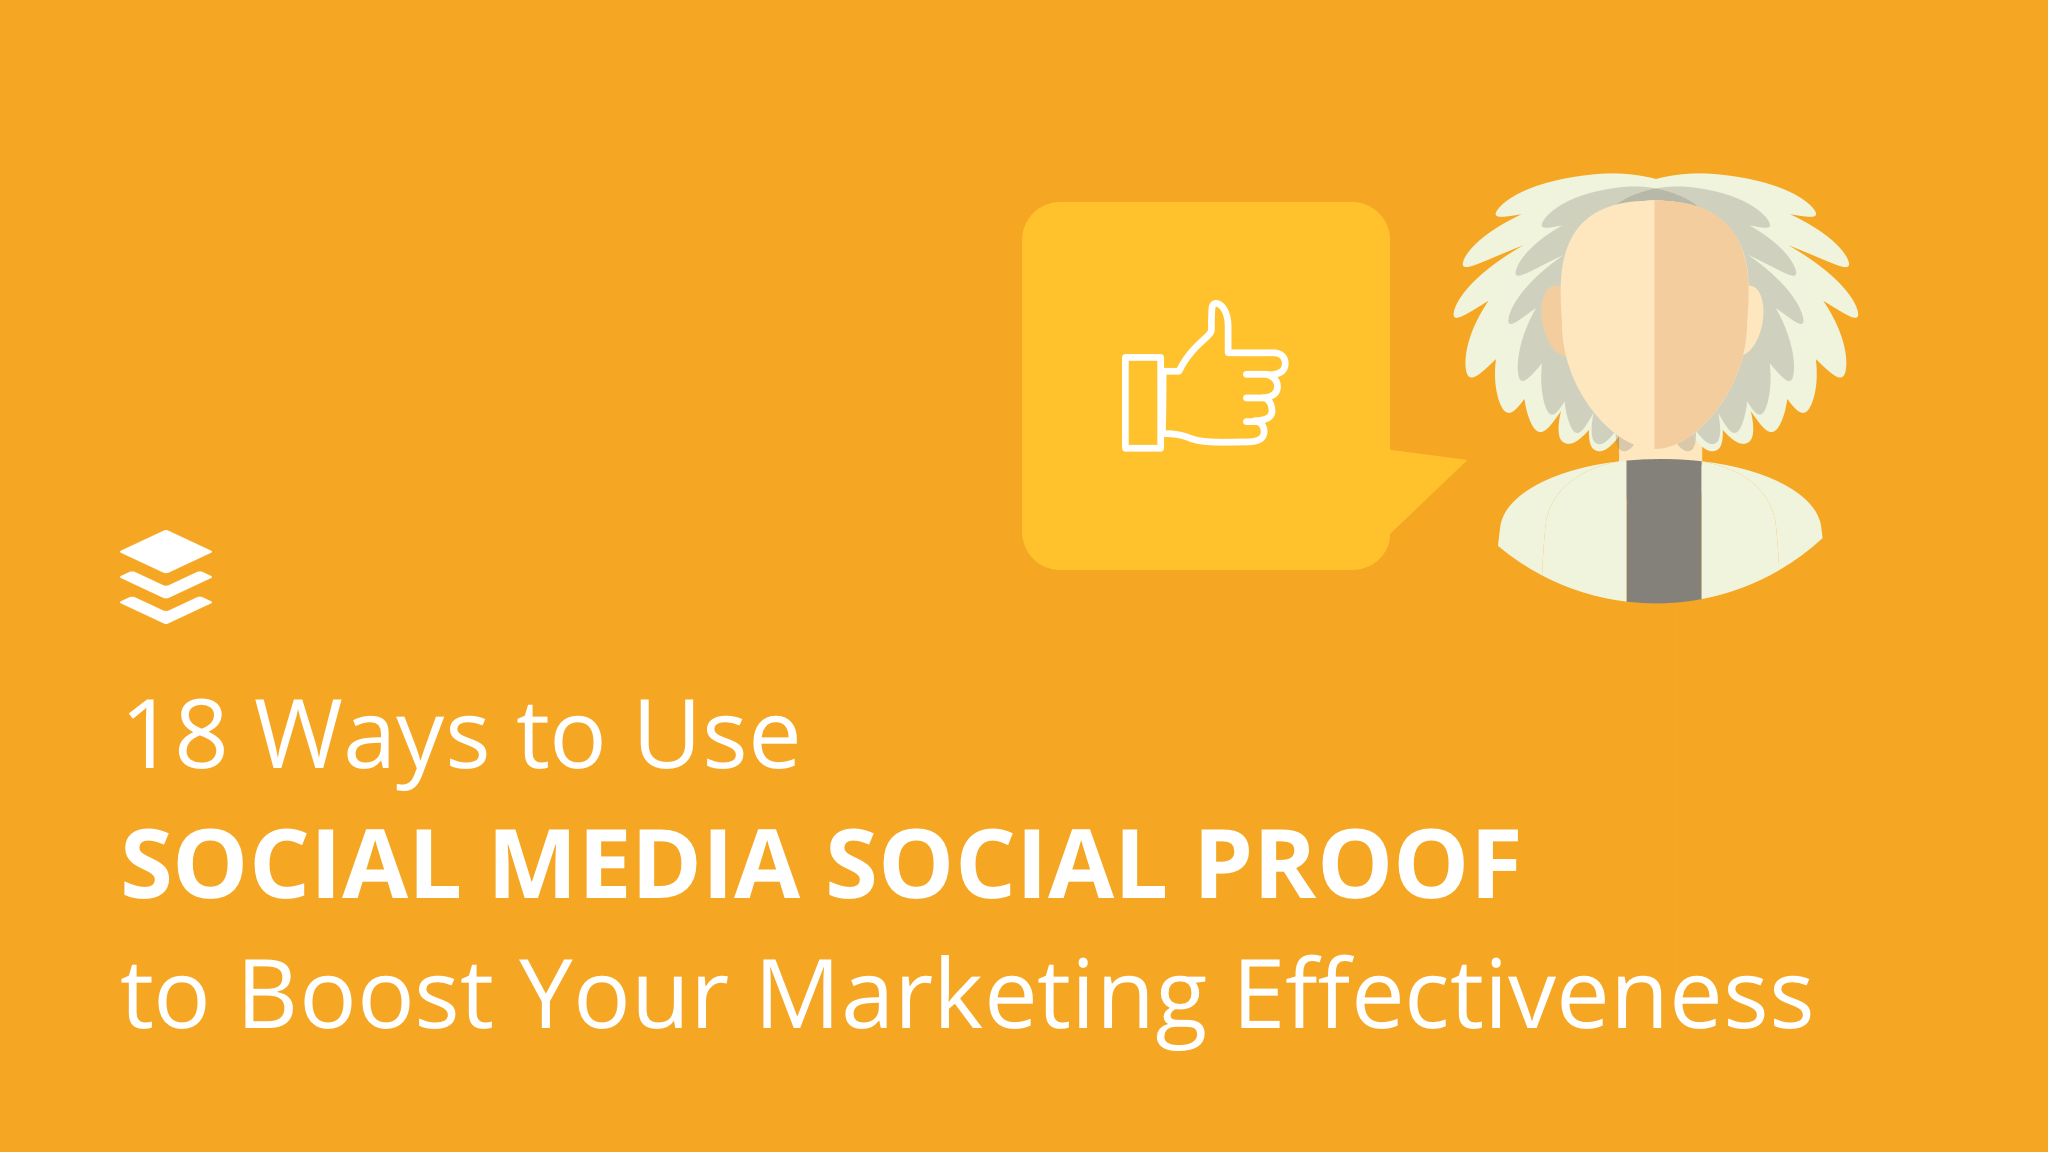 19 Ways to Use Social Media Social Proof to Boost Your Marketing Effectiveness